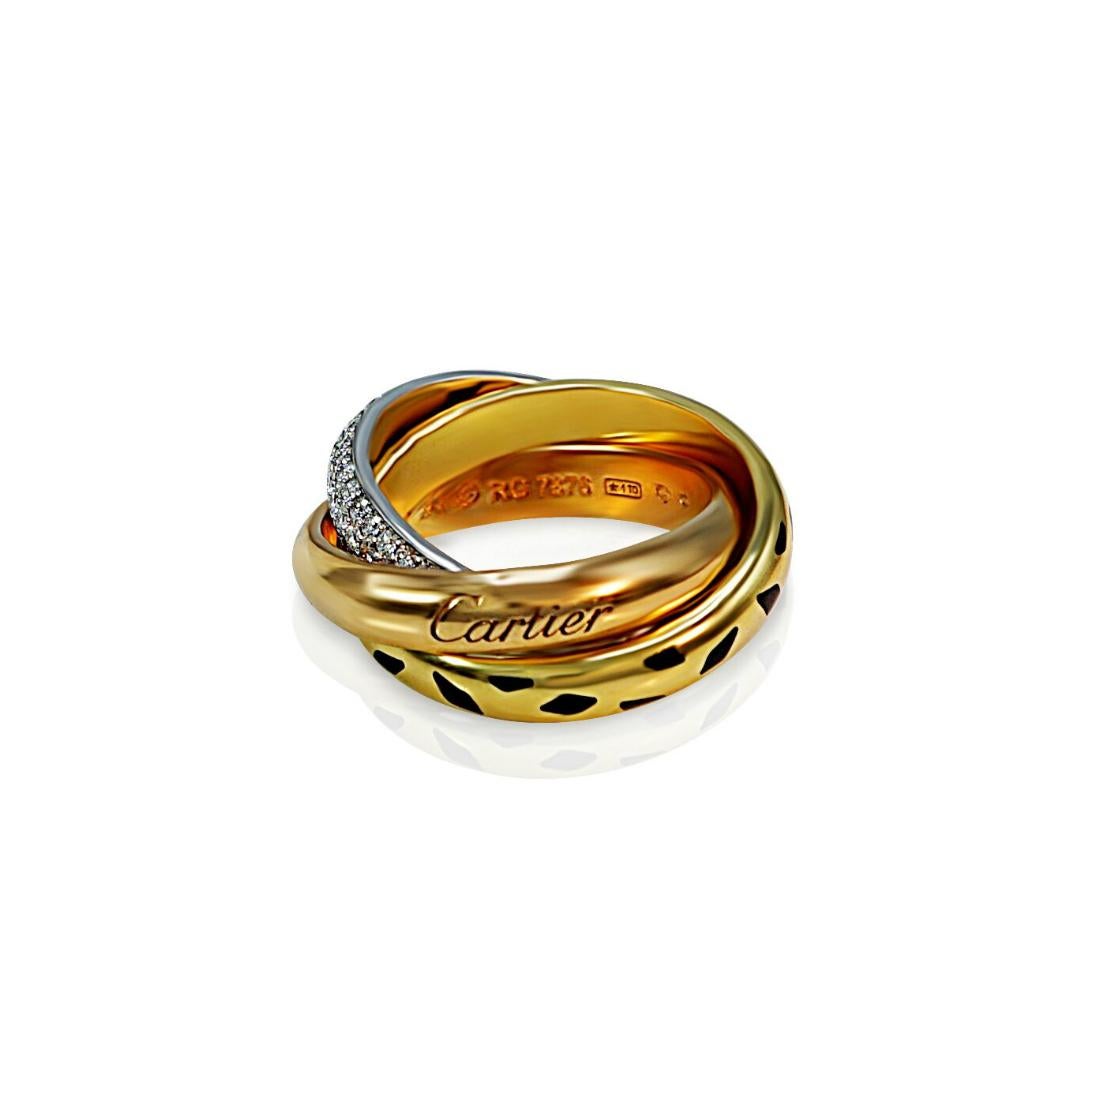 Tri Colored Gold, Enamel and Platinum Ring signed Cartier 